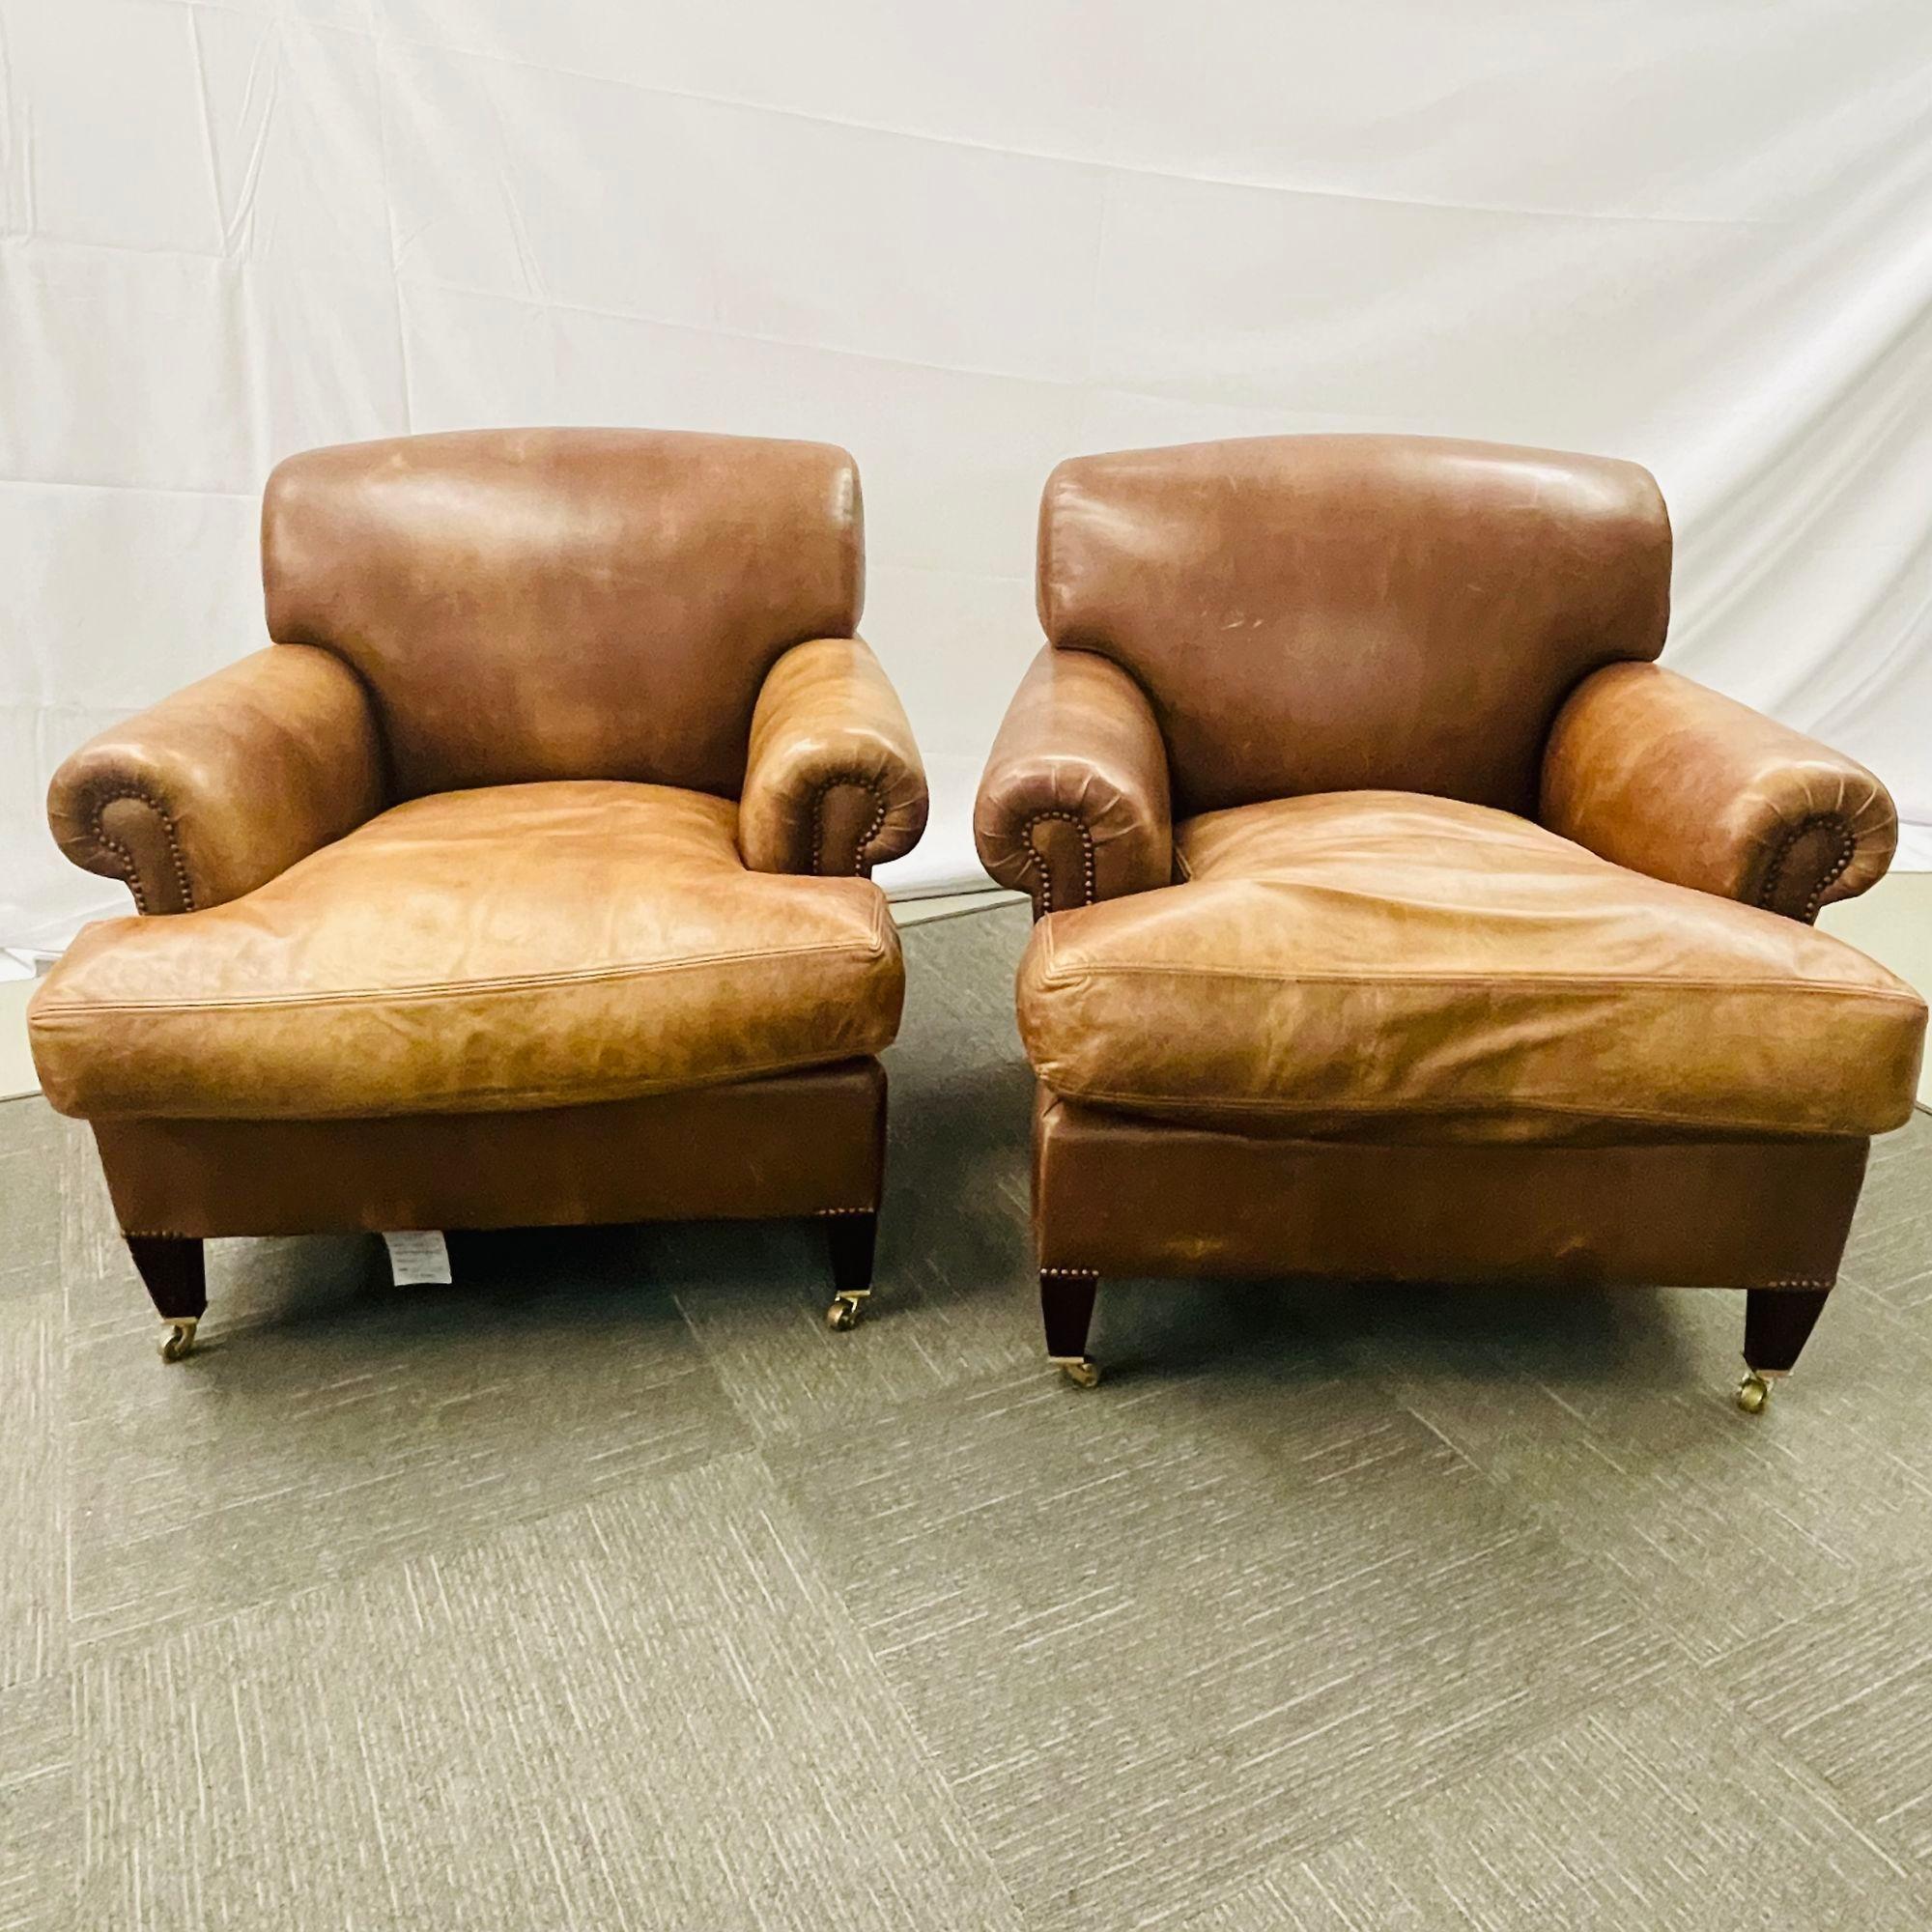 Howard George Smith Signature Scroll Arm Cigar Brown Leather Arm Chairs,
 
A stunning pair of custom manufactured large and comfortable oversized feather filled cushion lounge chairs by George Smith. The brass casters supporting a tapering